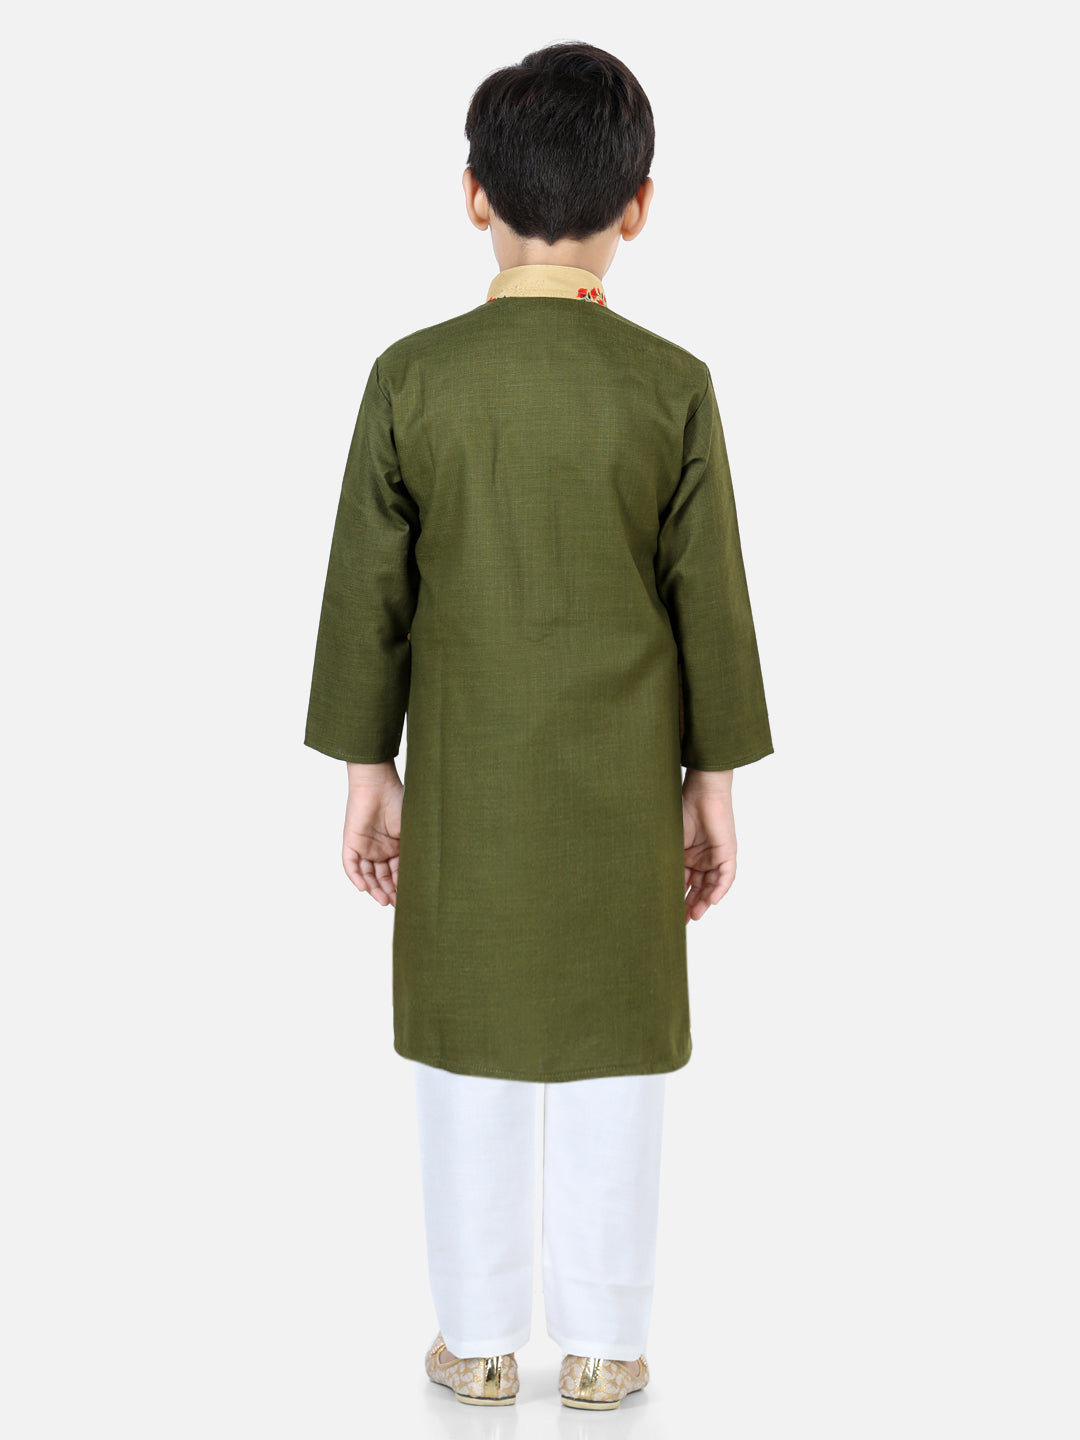 BownBee Full Sleeves Solid Kurta With Floral Printed Attached Jacket And Pyjama - Green Yellow